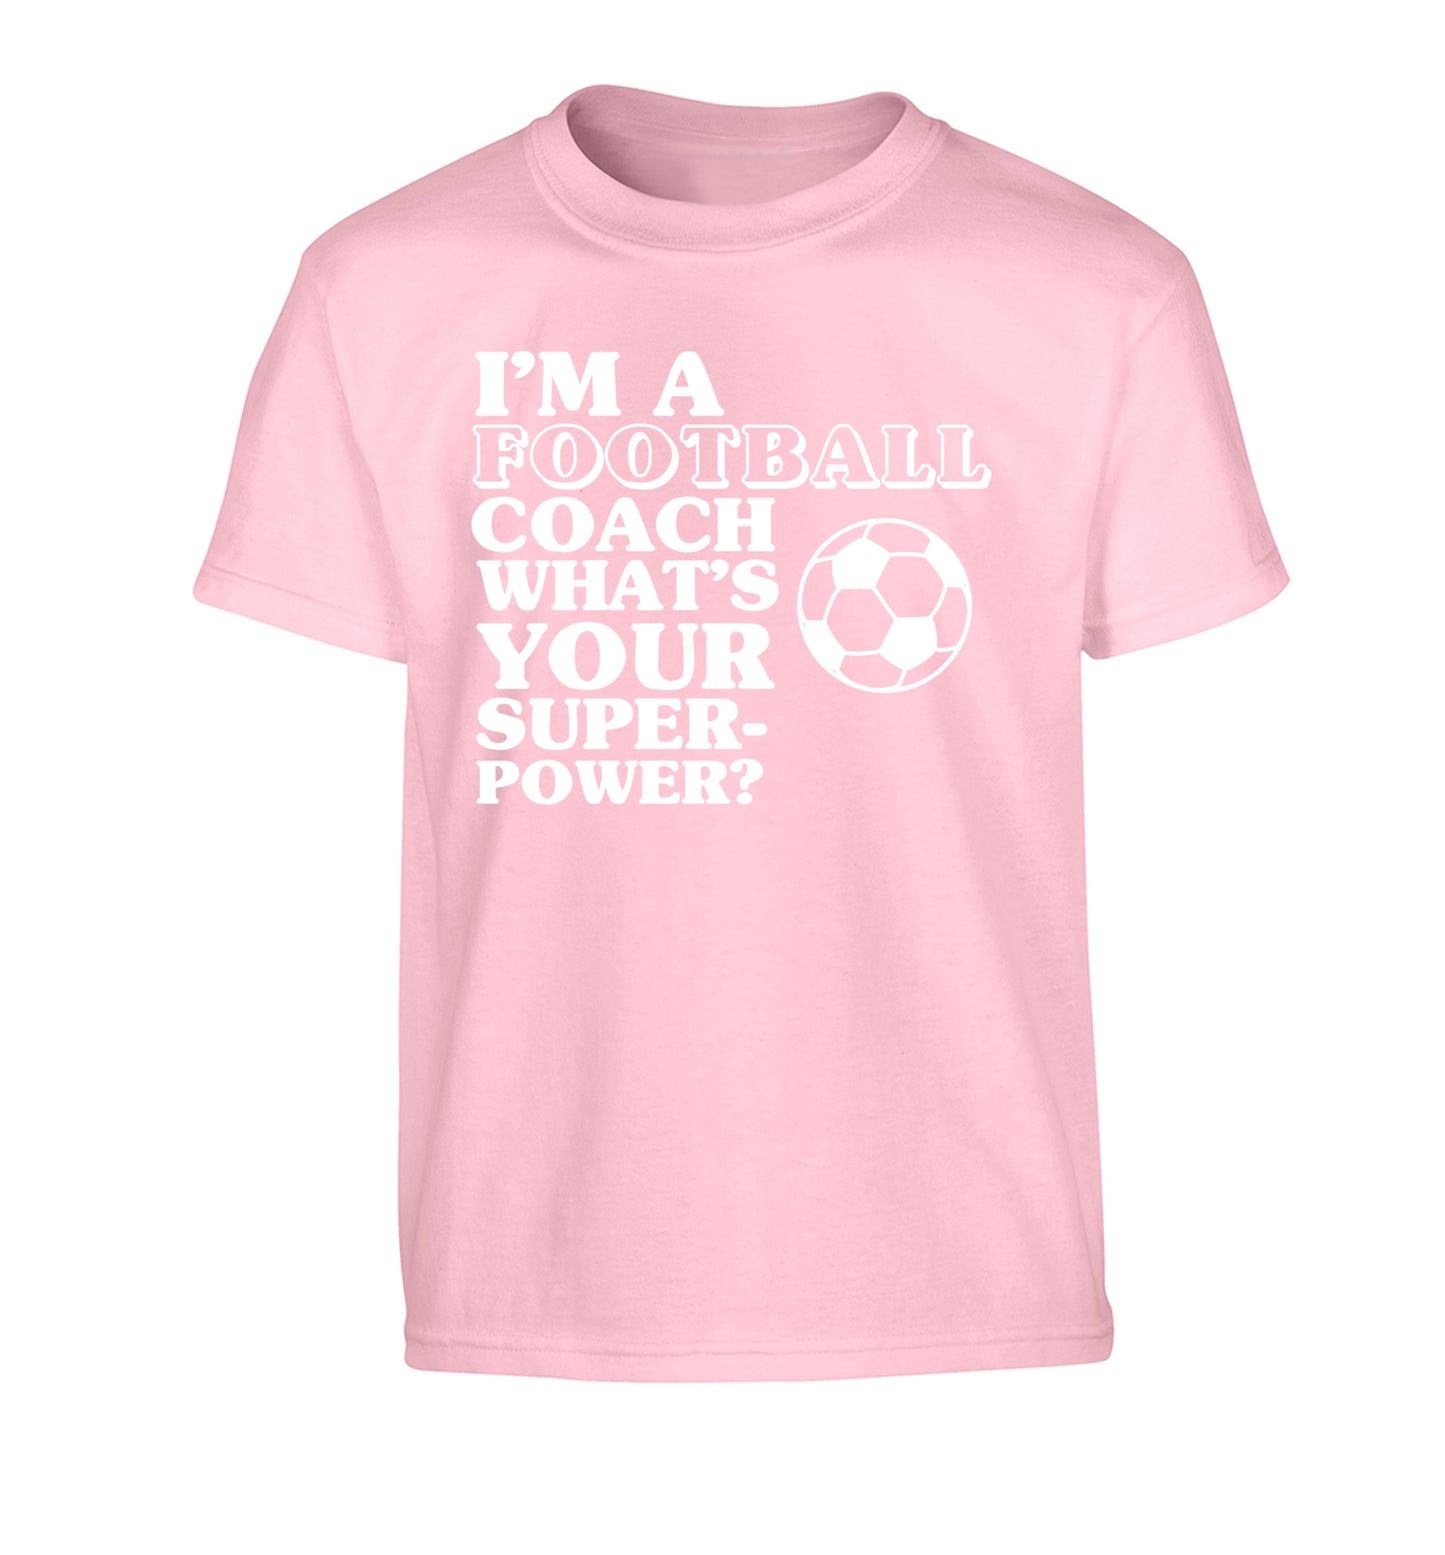 I'm a football coach what's your superpower? Children's light pink Tshirt 12-14 Years